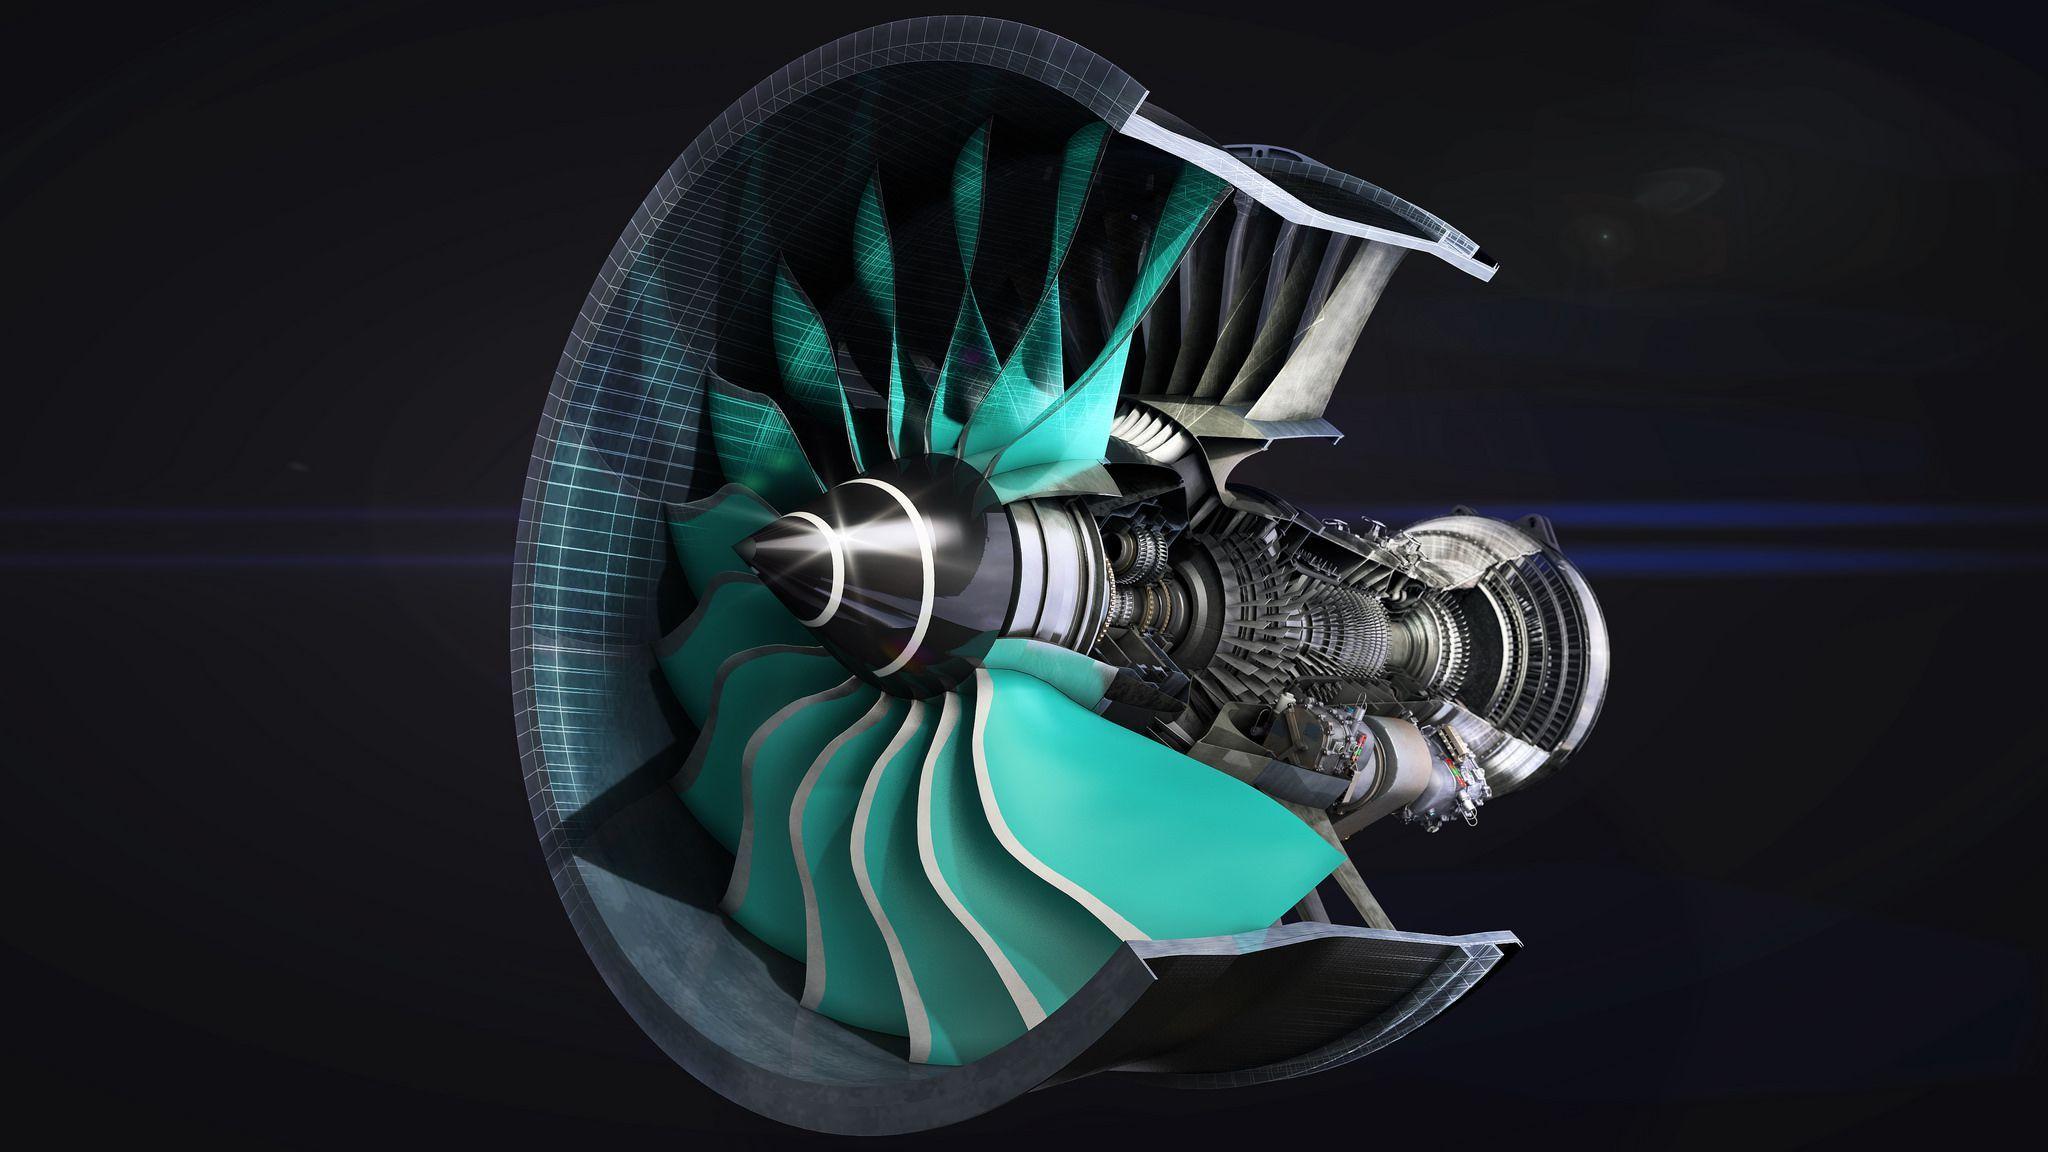 Rolls Royce Sets Record For Most Powerful Turbofan Gearbox In The World